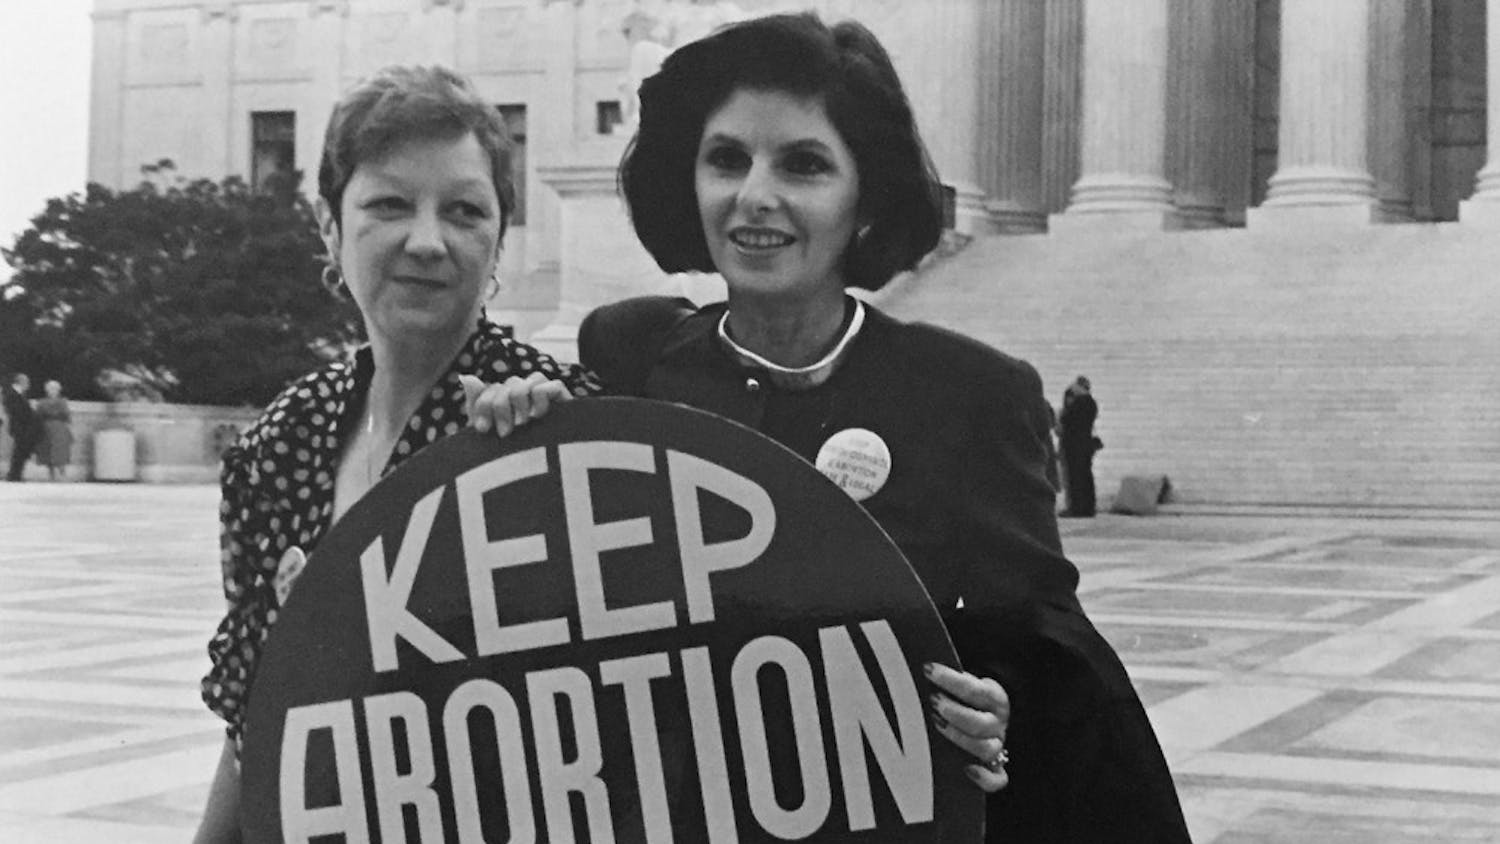 Norma McCorvey (left), the plaintiff of Roe v. Wade, died at age 69. Here,&nbsp;McCorvey (Jane Roe) and her lawyer Gloria Allfred stand&nbsp;on the steps of the Supreme Court, 1989. Photo courtesy of&nbsp;Lorie Shaull.&nbsp;